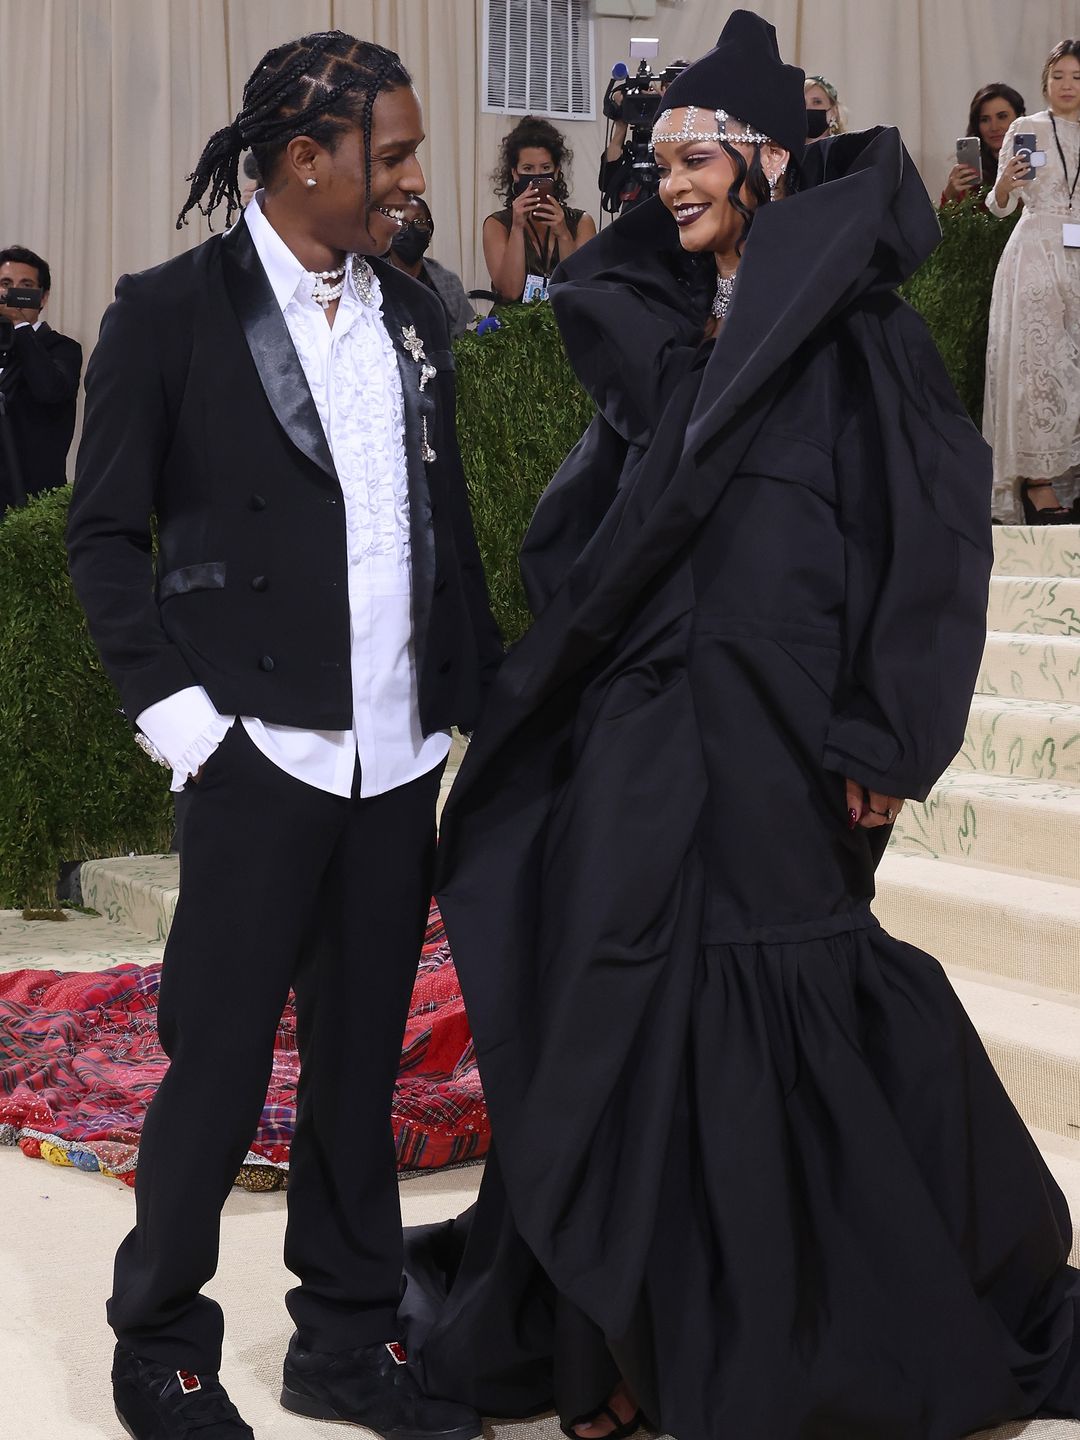 Rihanna and ASAP Rocky smiling at the 2021 Met Gala